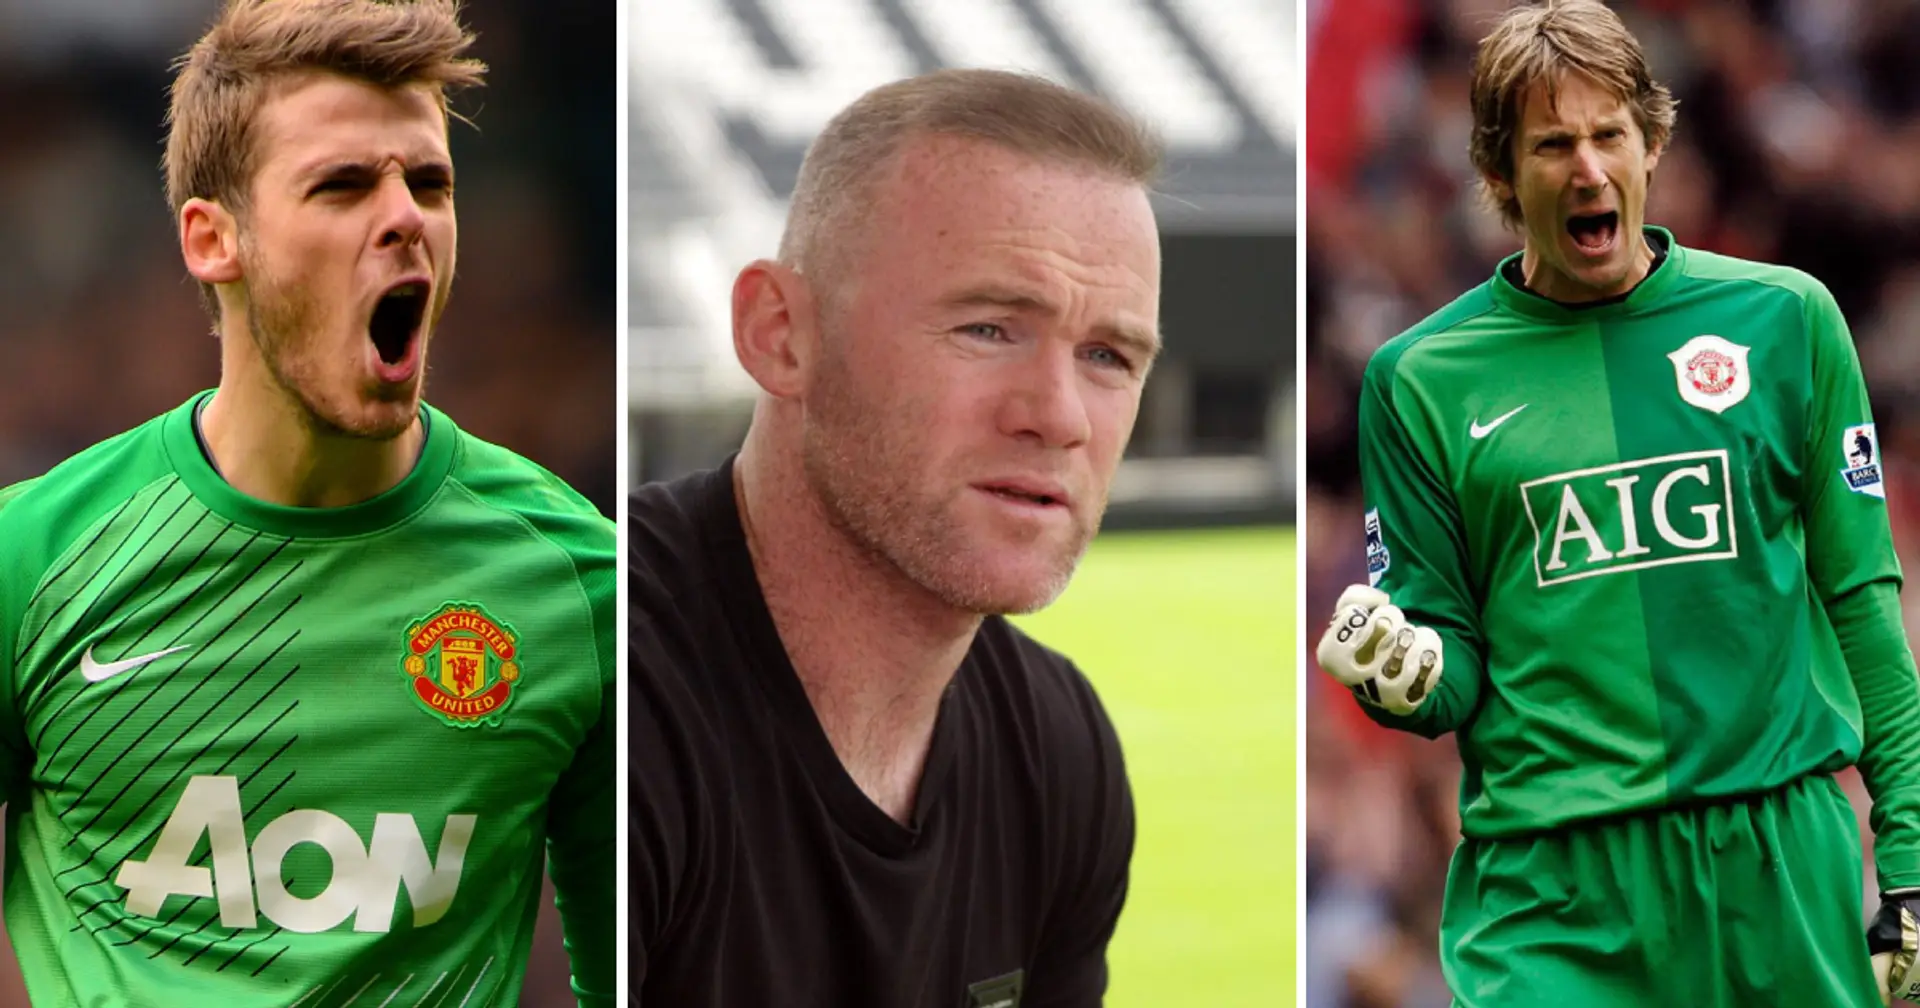  'I lost faith in him for a couple of years': Wayne Rooney initially doubted David De Gea's ability to succeed Edwin van der Sar